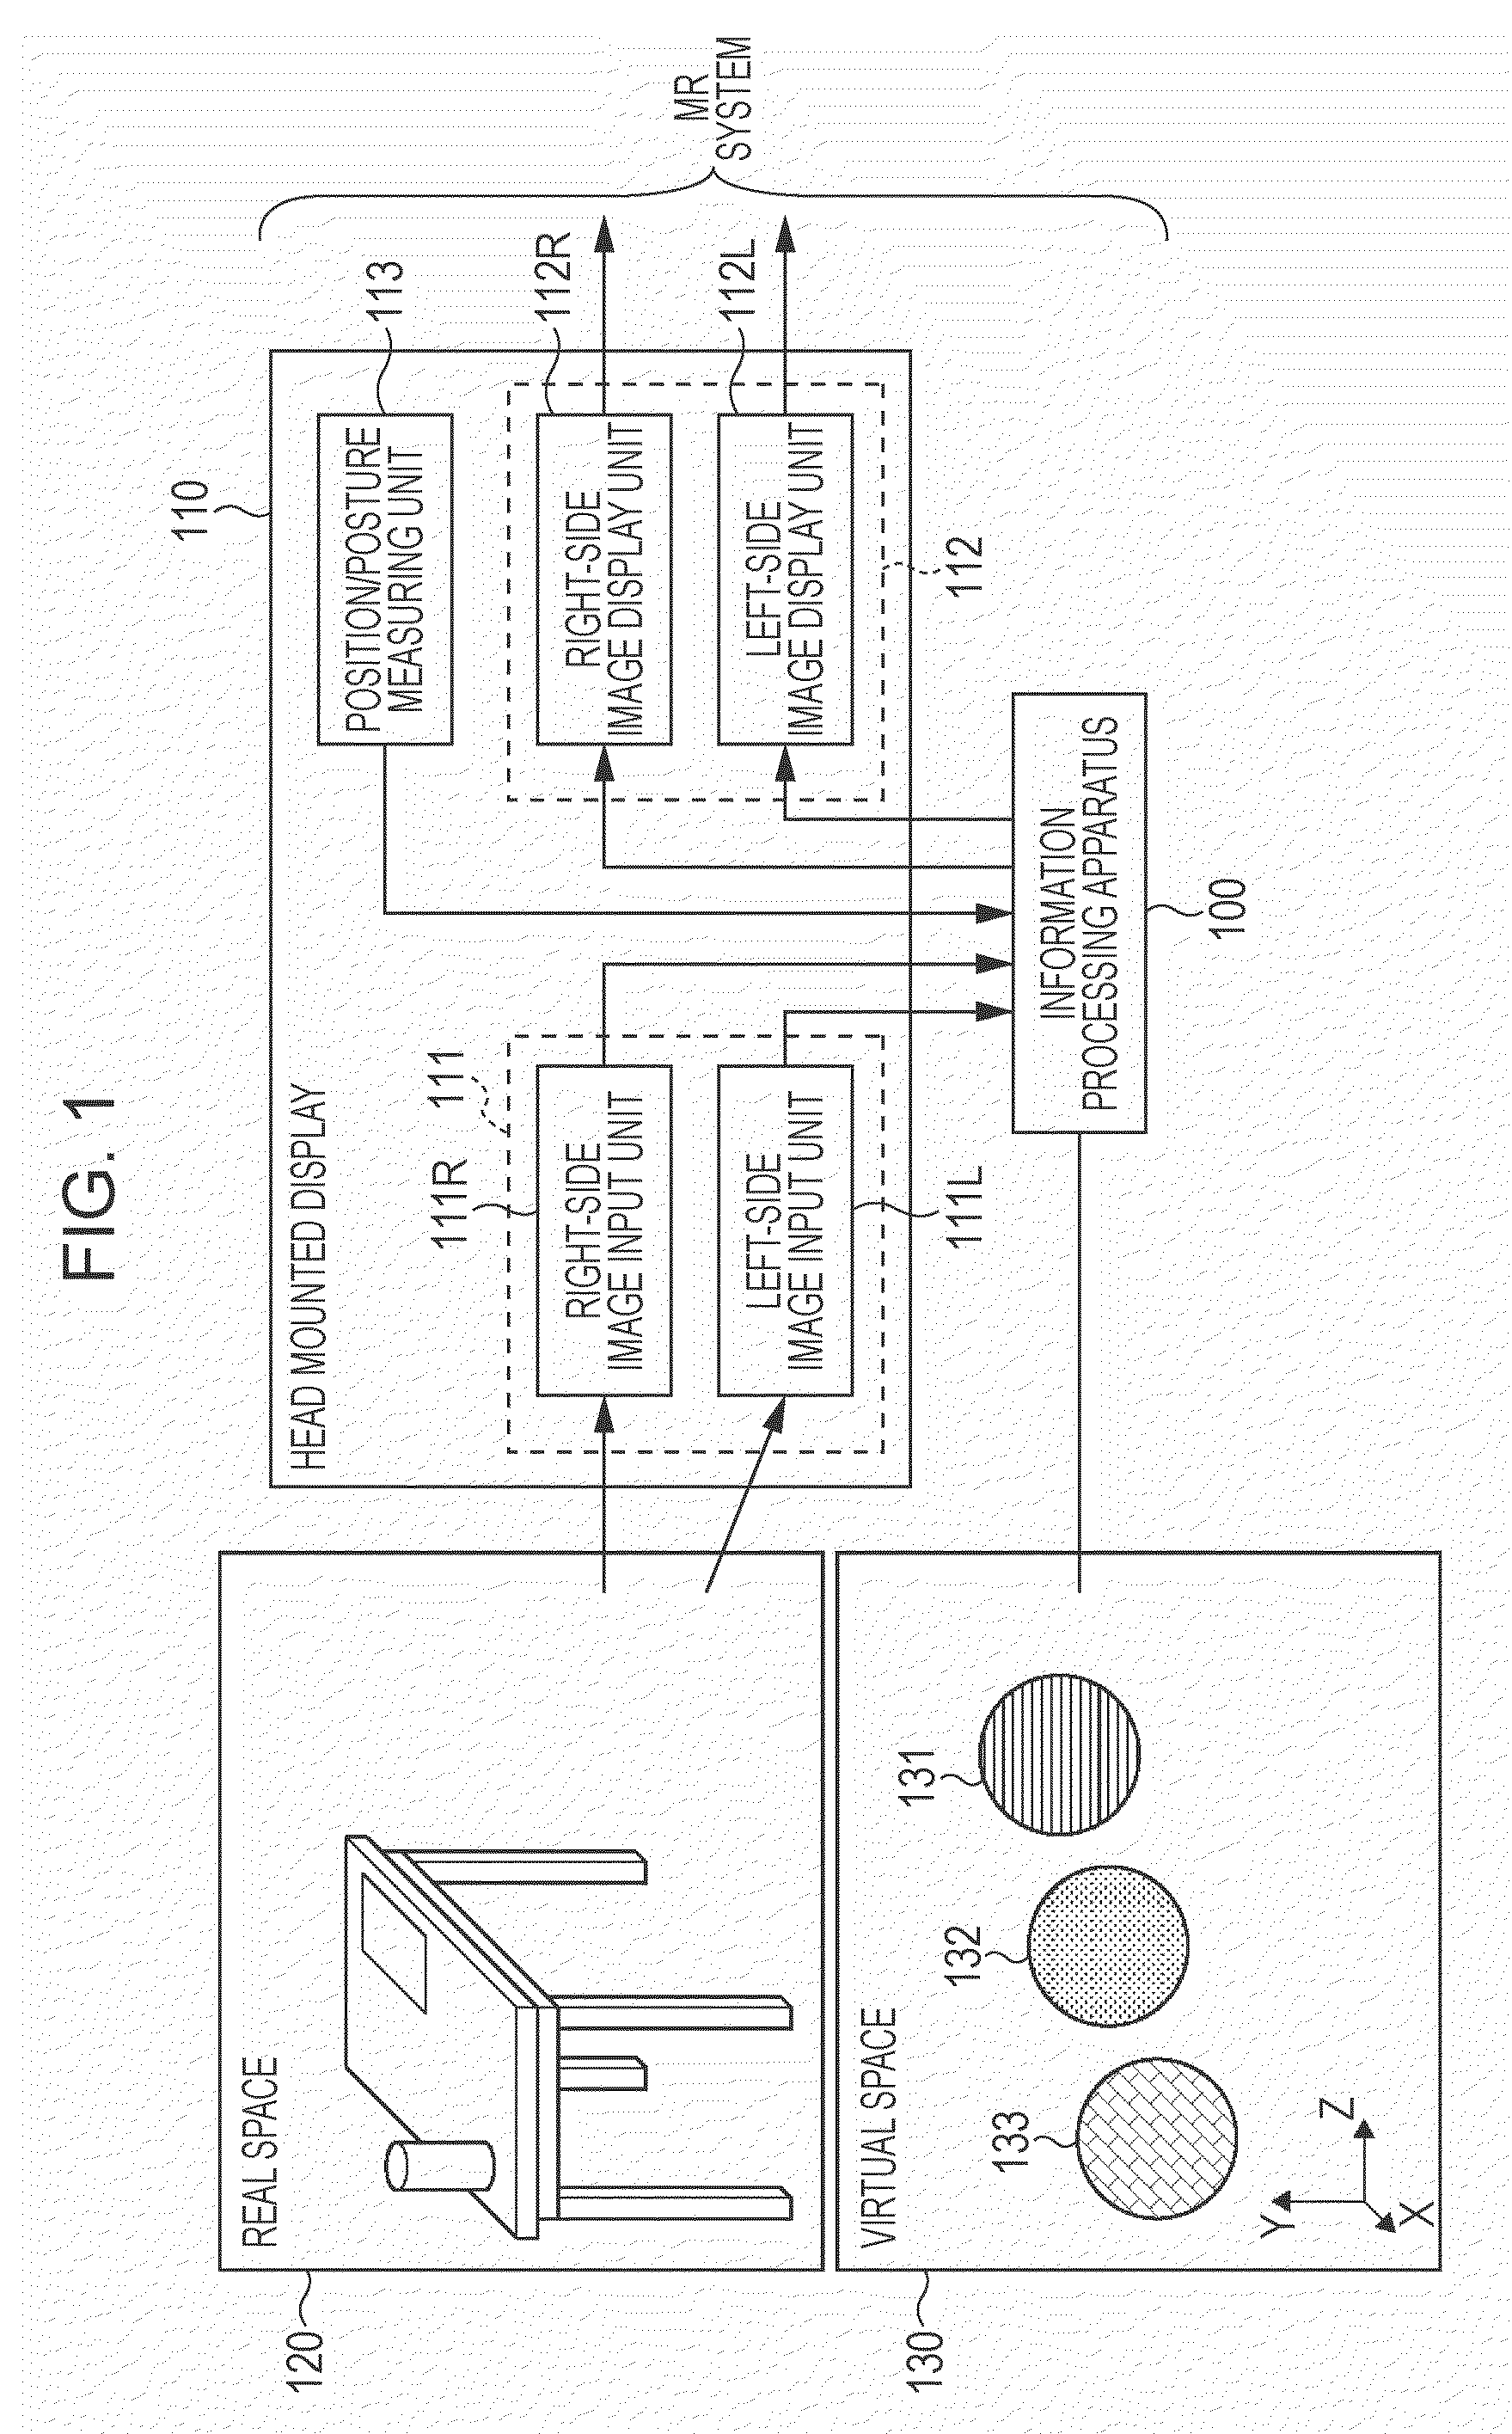 Information processing apparatus and information processing method for processing image information at an arbitrary viewpoint in a physical space or virtual space